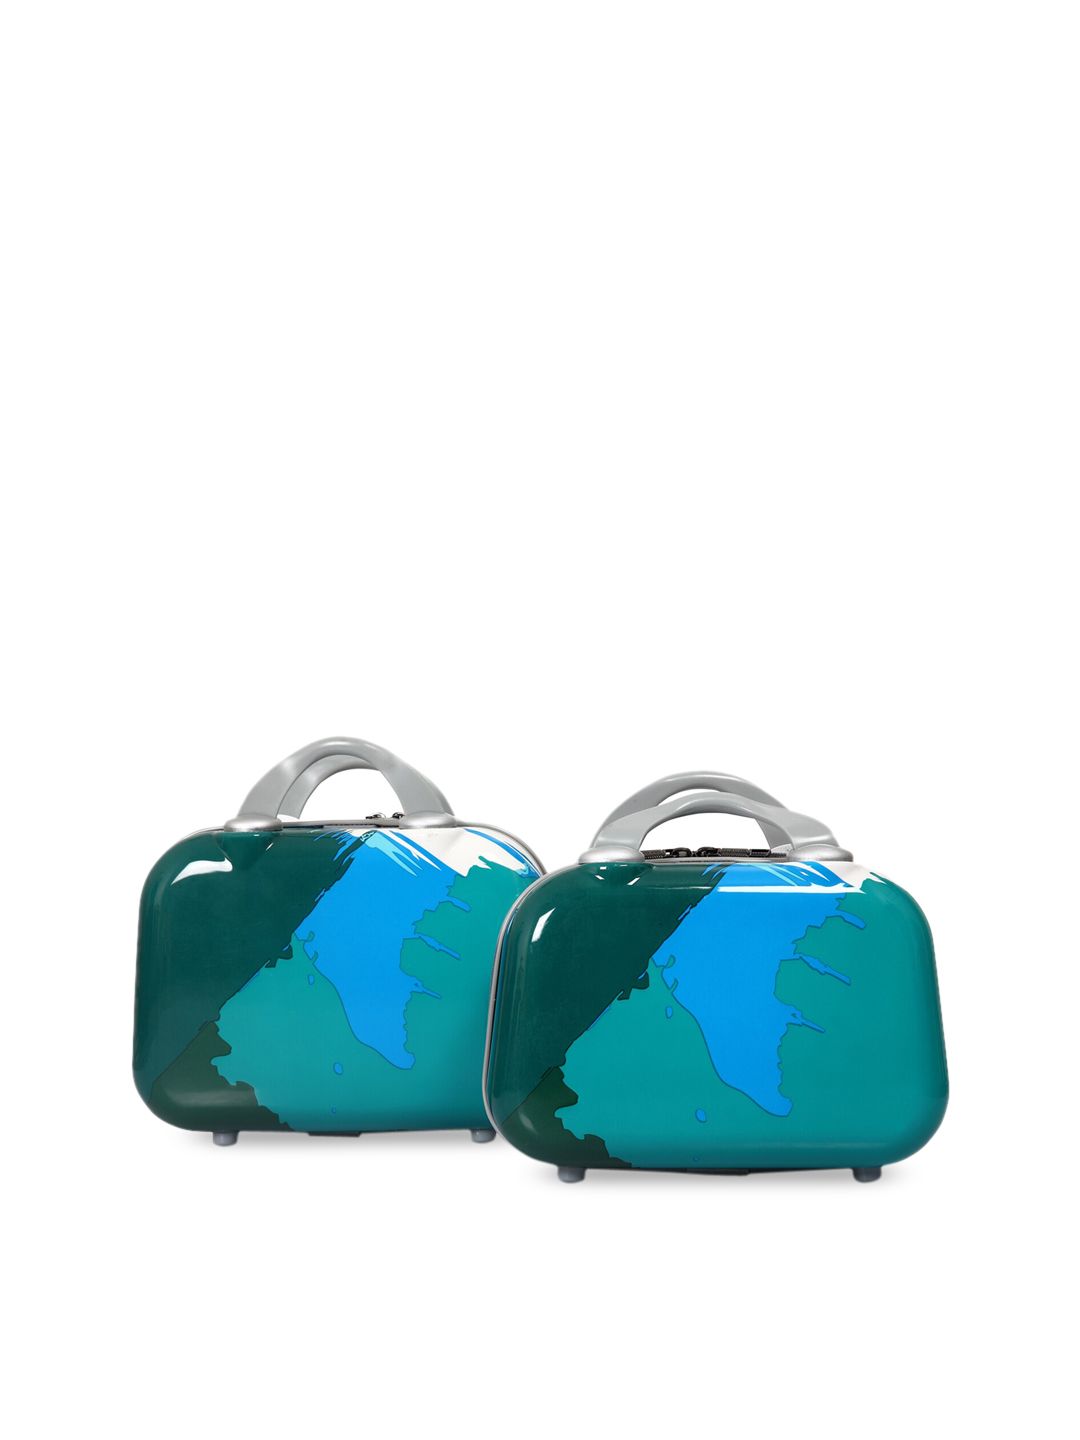 Polo Class Set of 2 Blue & Green Printed Vanity Bags Price in India